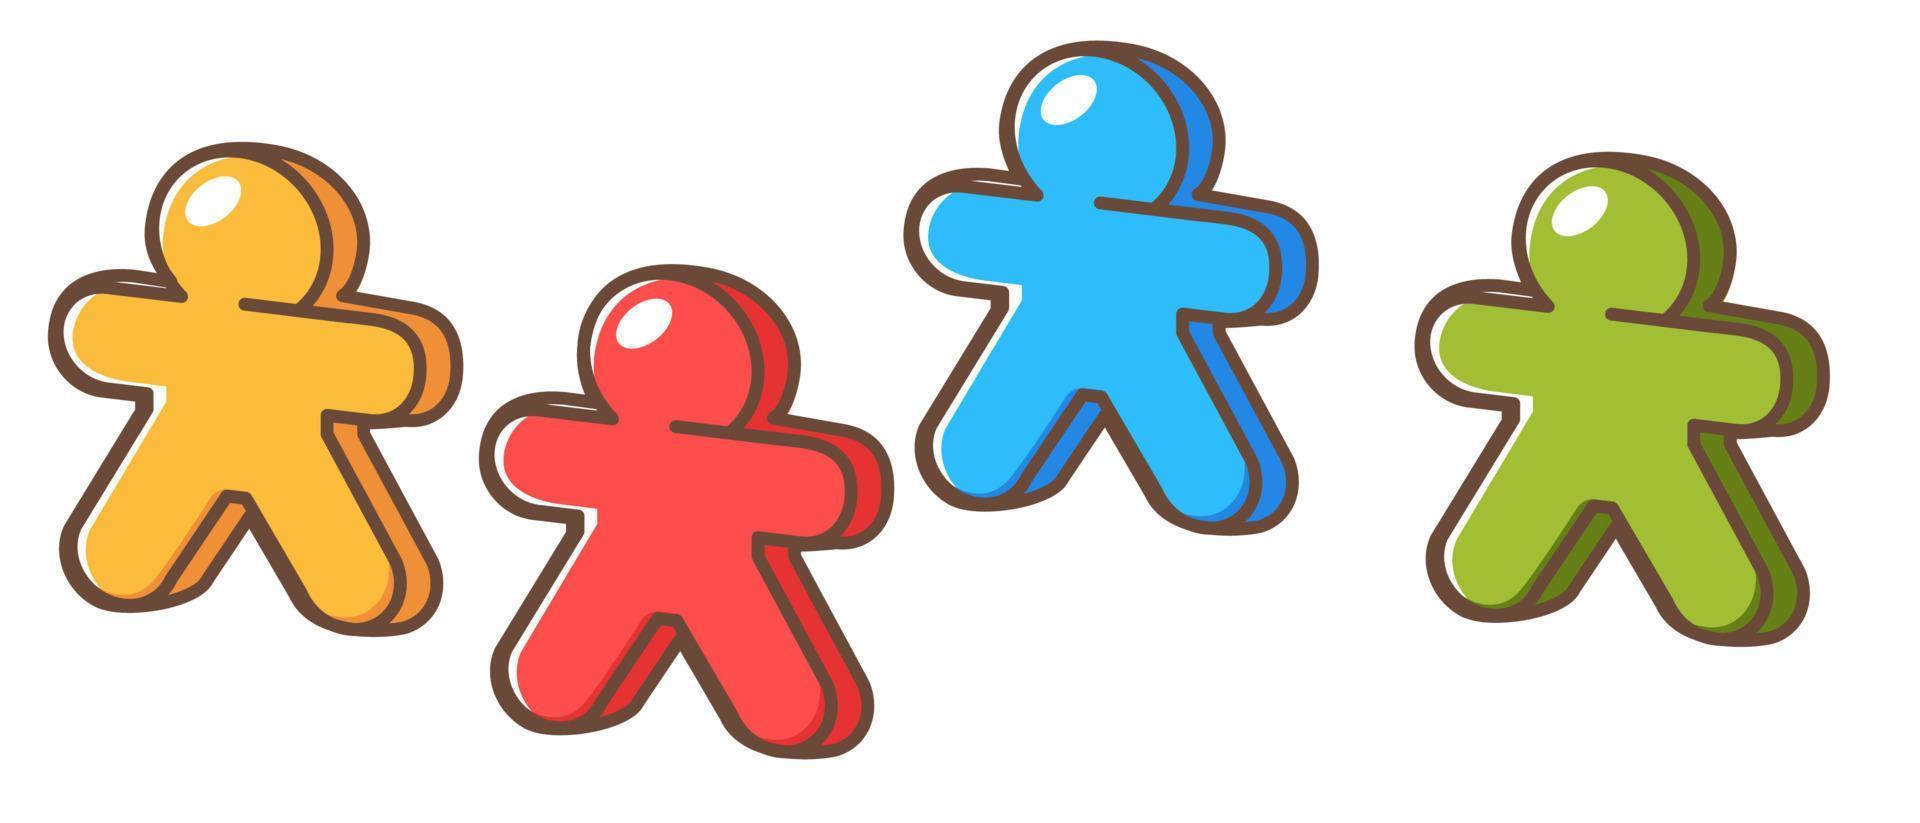 Board game figurines in shape of humans vector